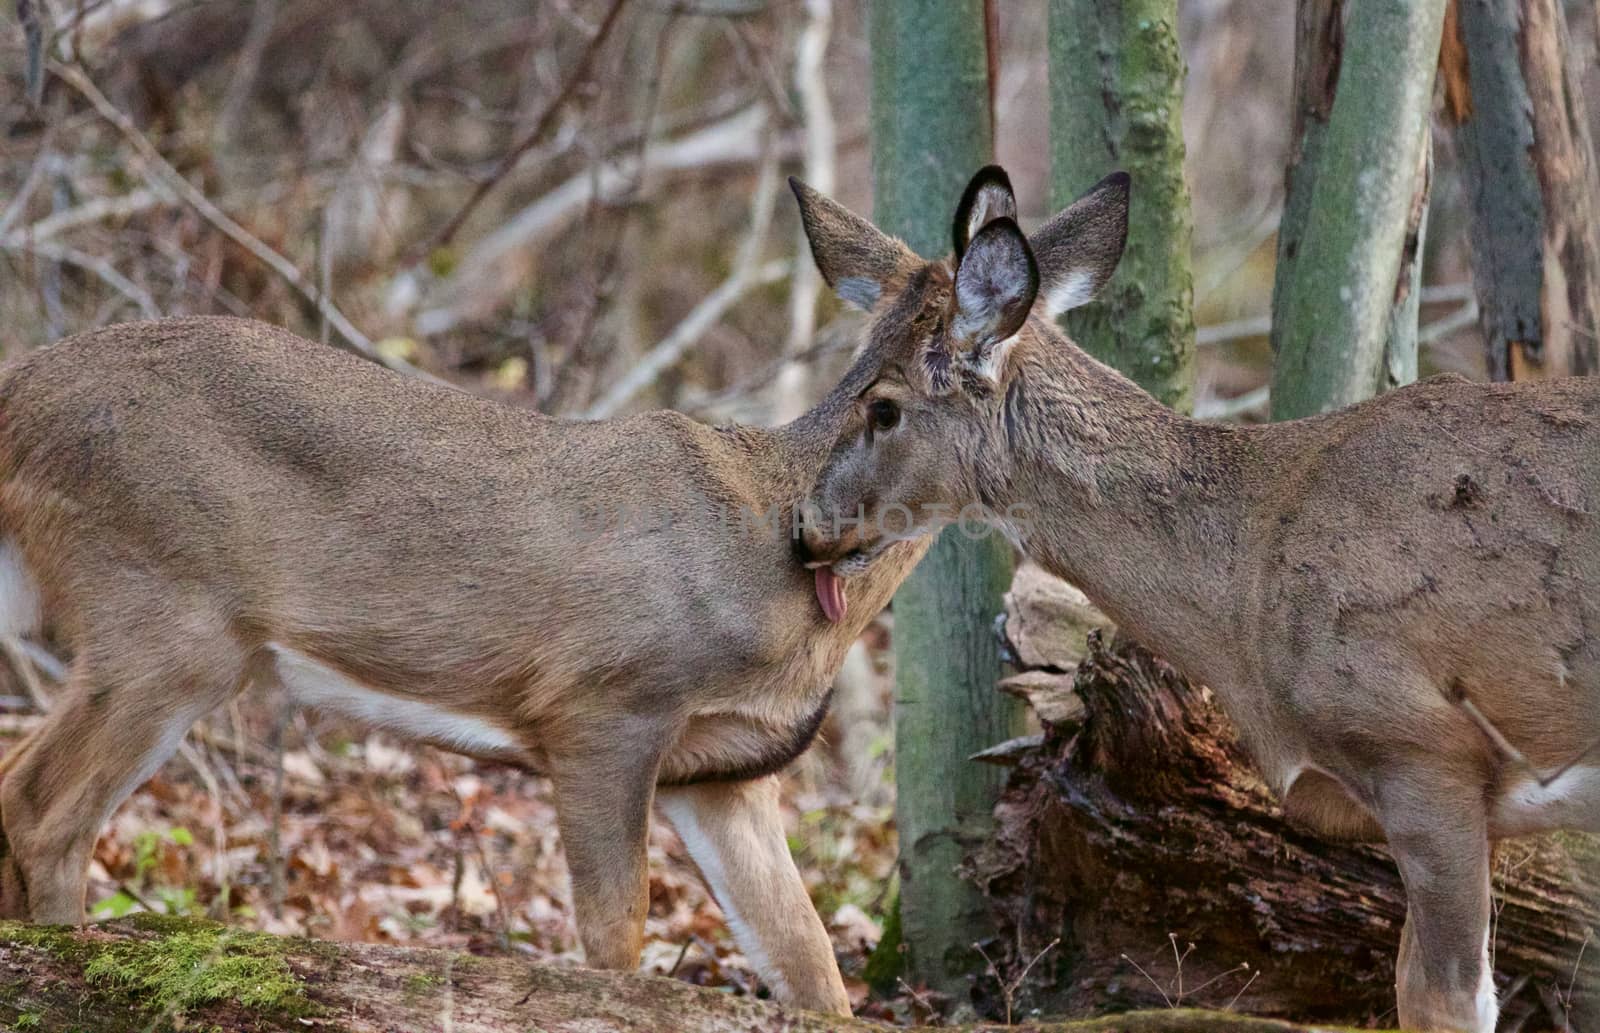 Image with the pair of wild deers licking each other